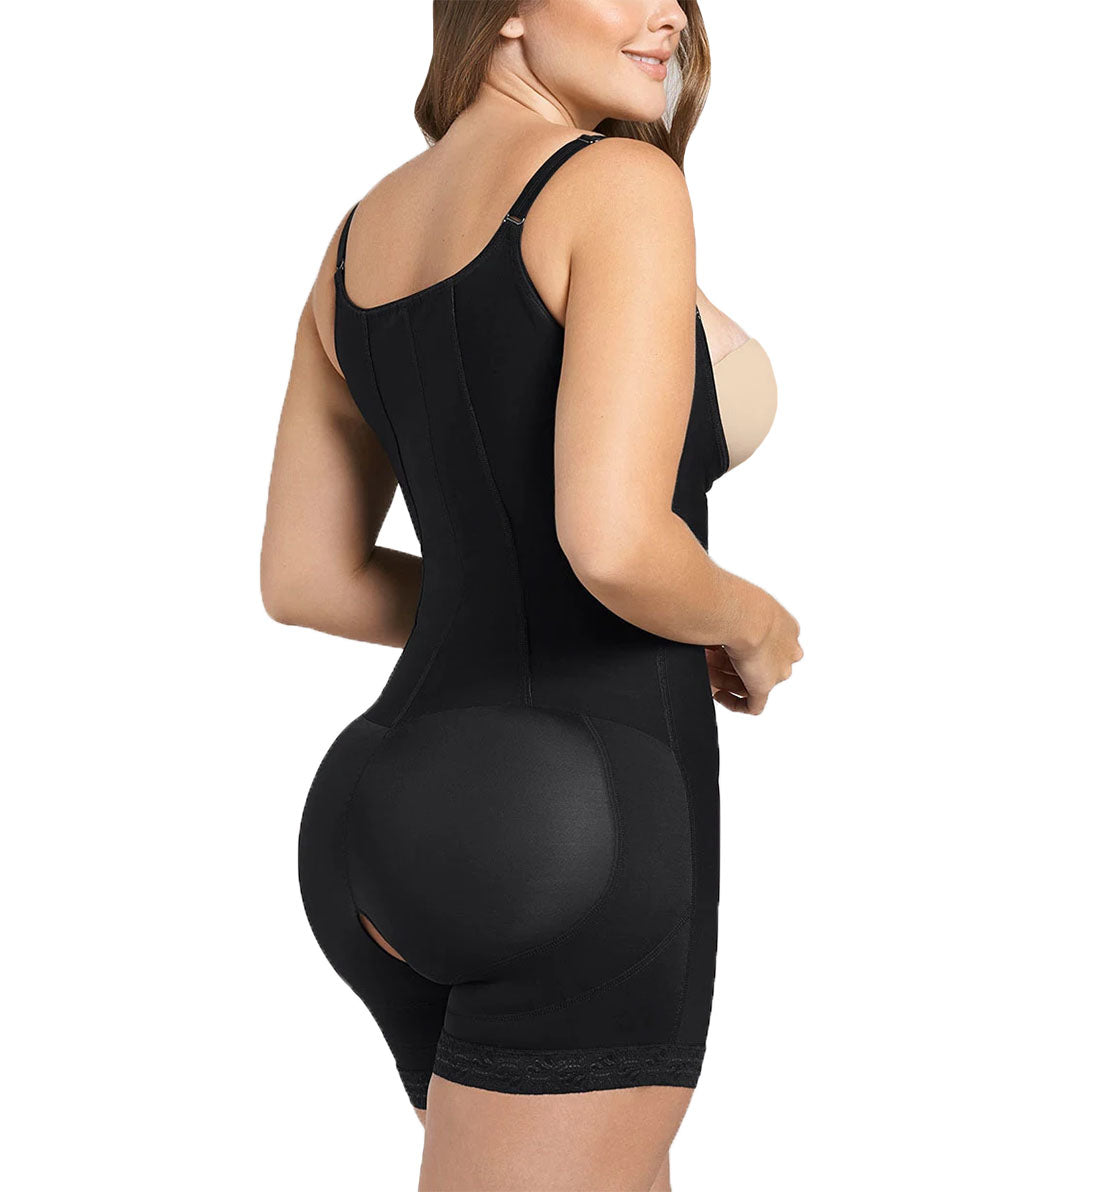 Leonisa Firm Compression Shaper with Boyshort Butt Lifter (018491)- Black